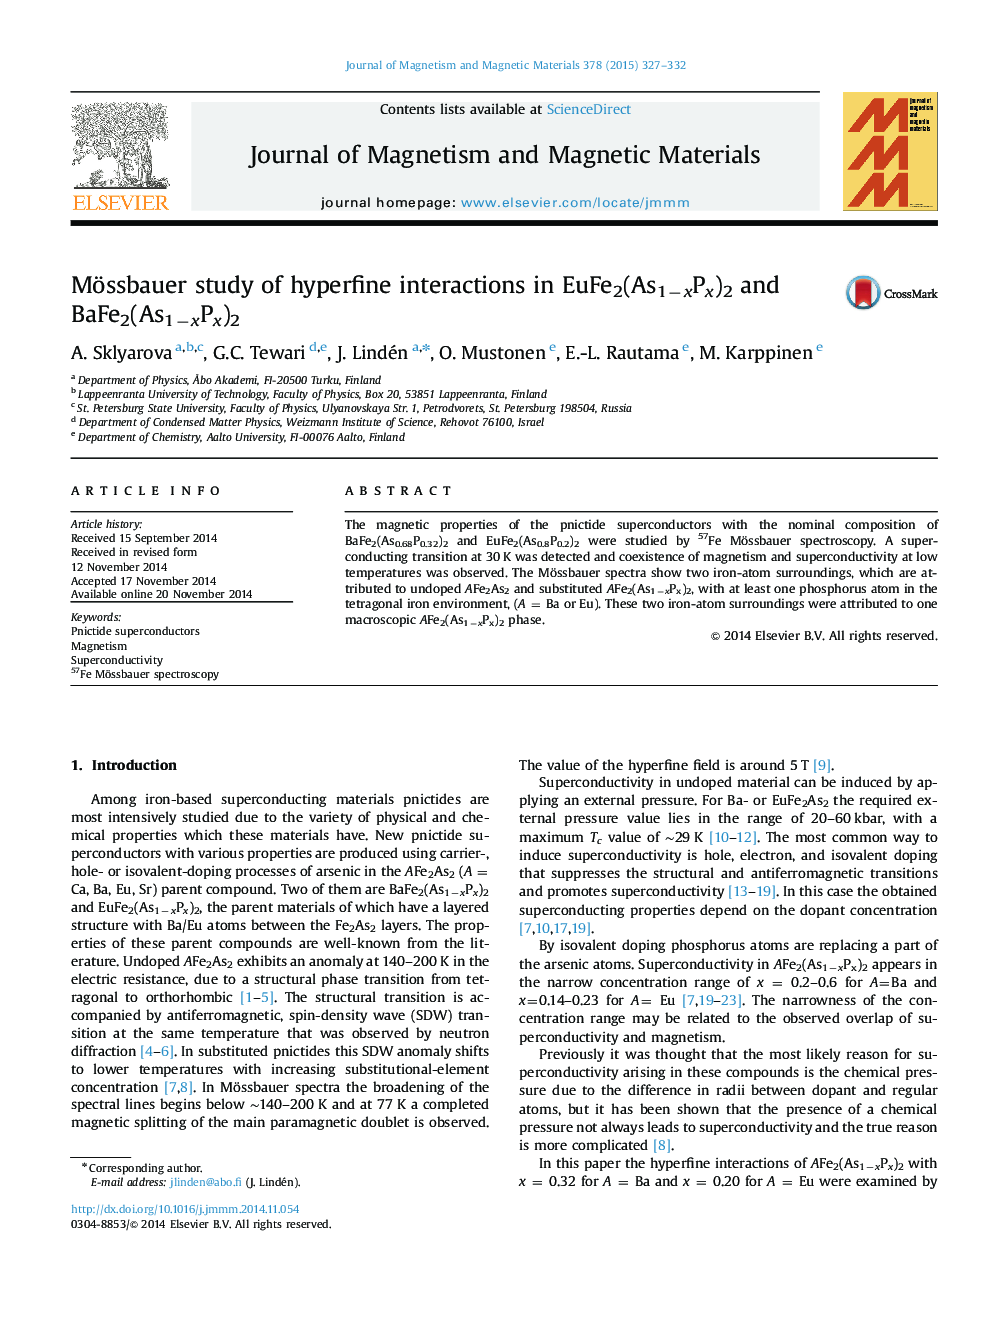 Mössbauer study of hyperfine interactions in EuFe2(As1−xPx)2 and BaFe2(As1−xPx)2